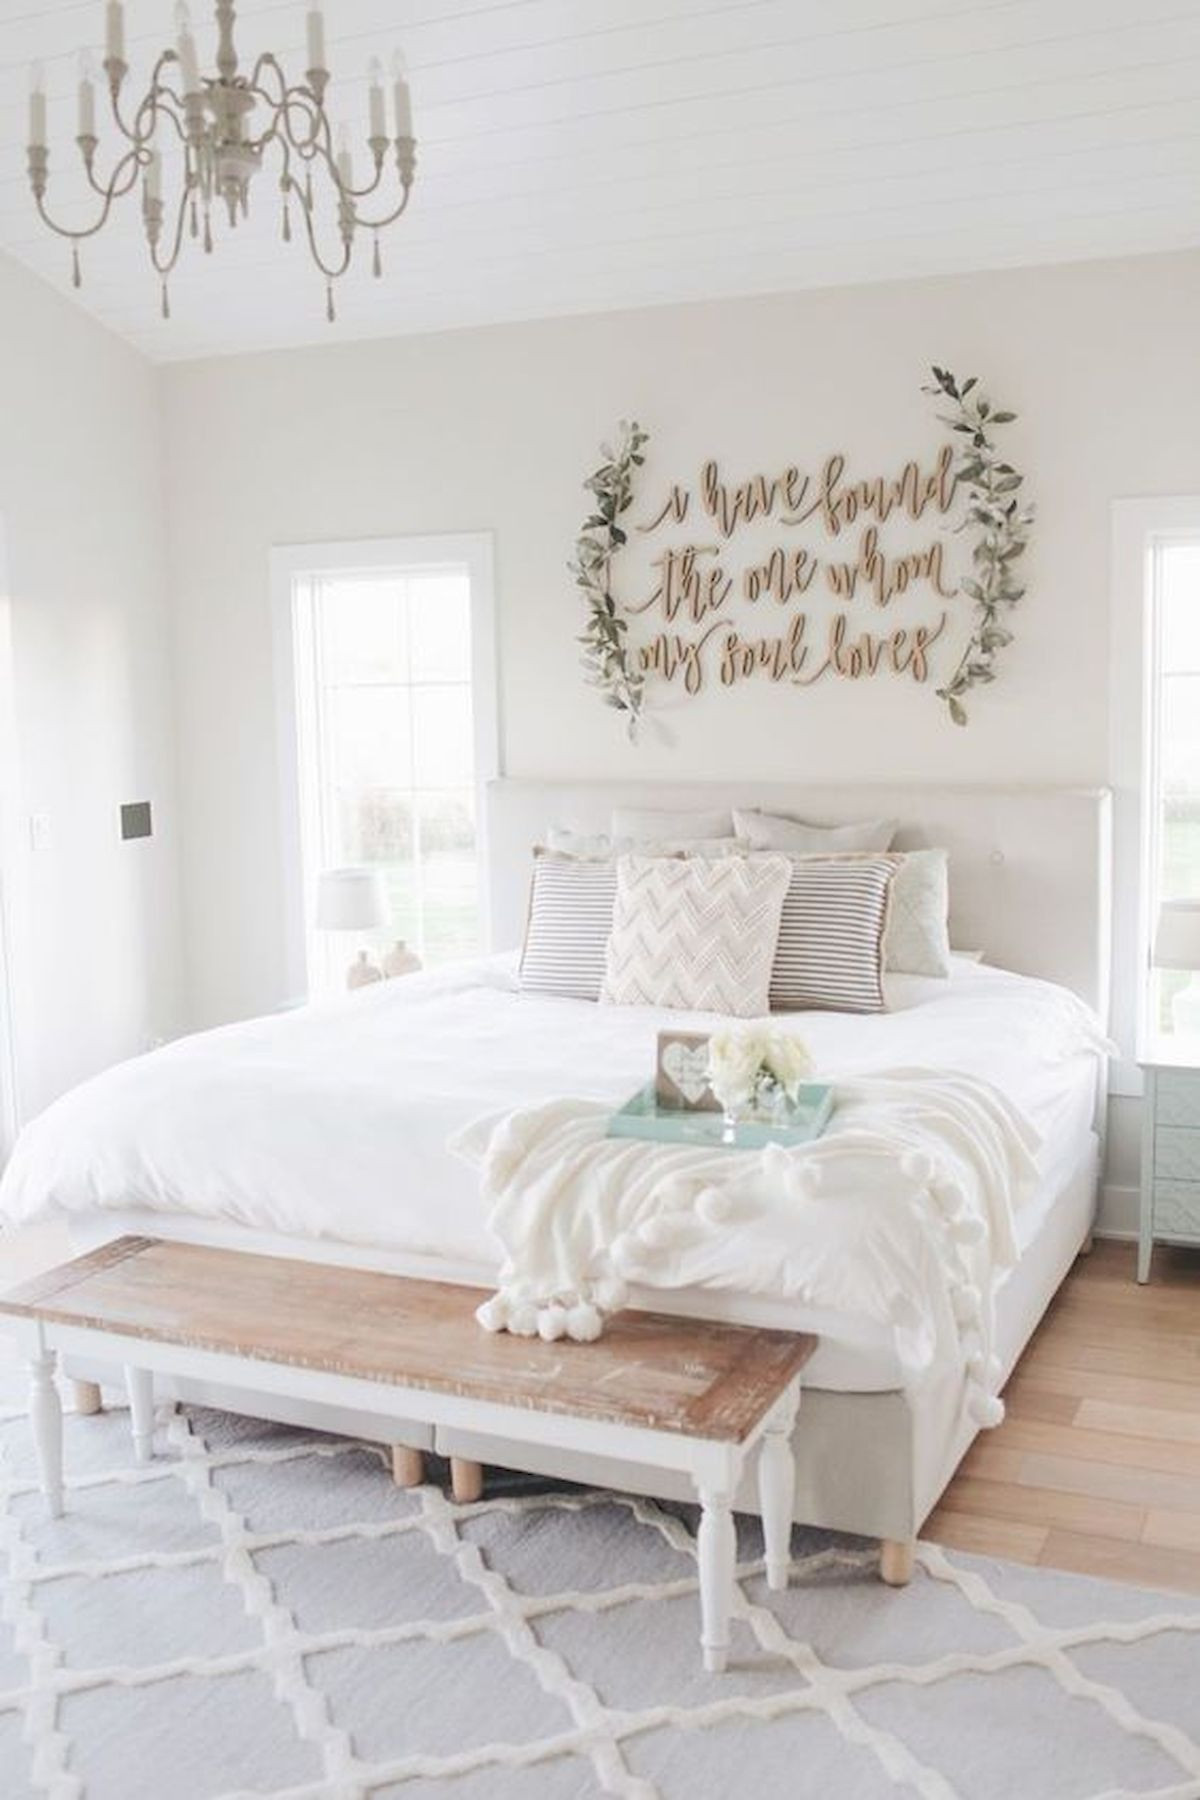 Wall Prints For Bedroom
 53 Best Farmhouse Wall Decor Ideas for bedroom Ideaboz